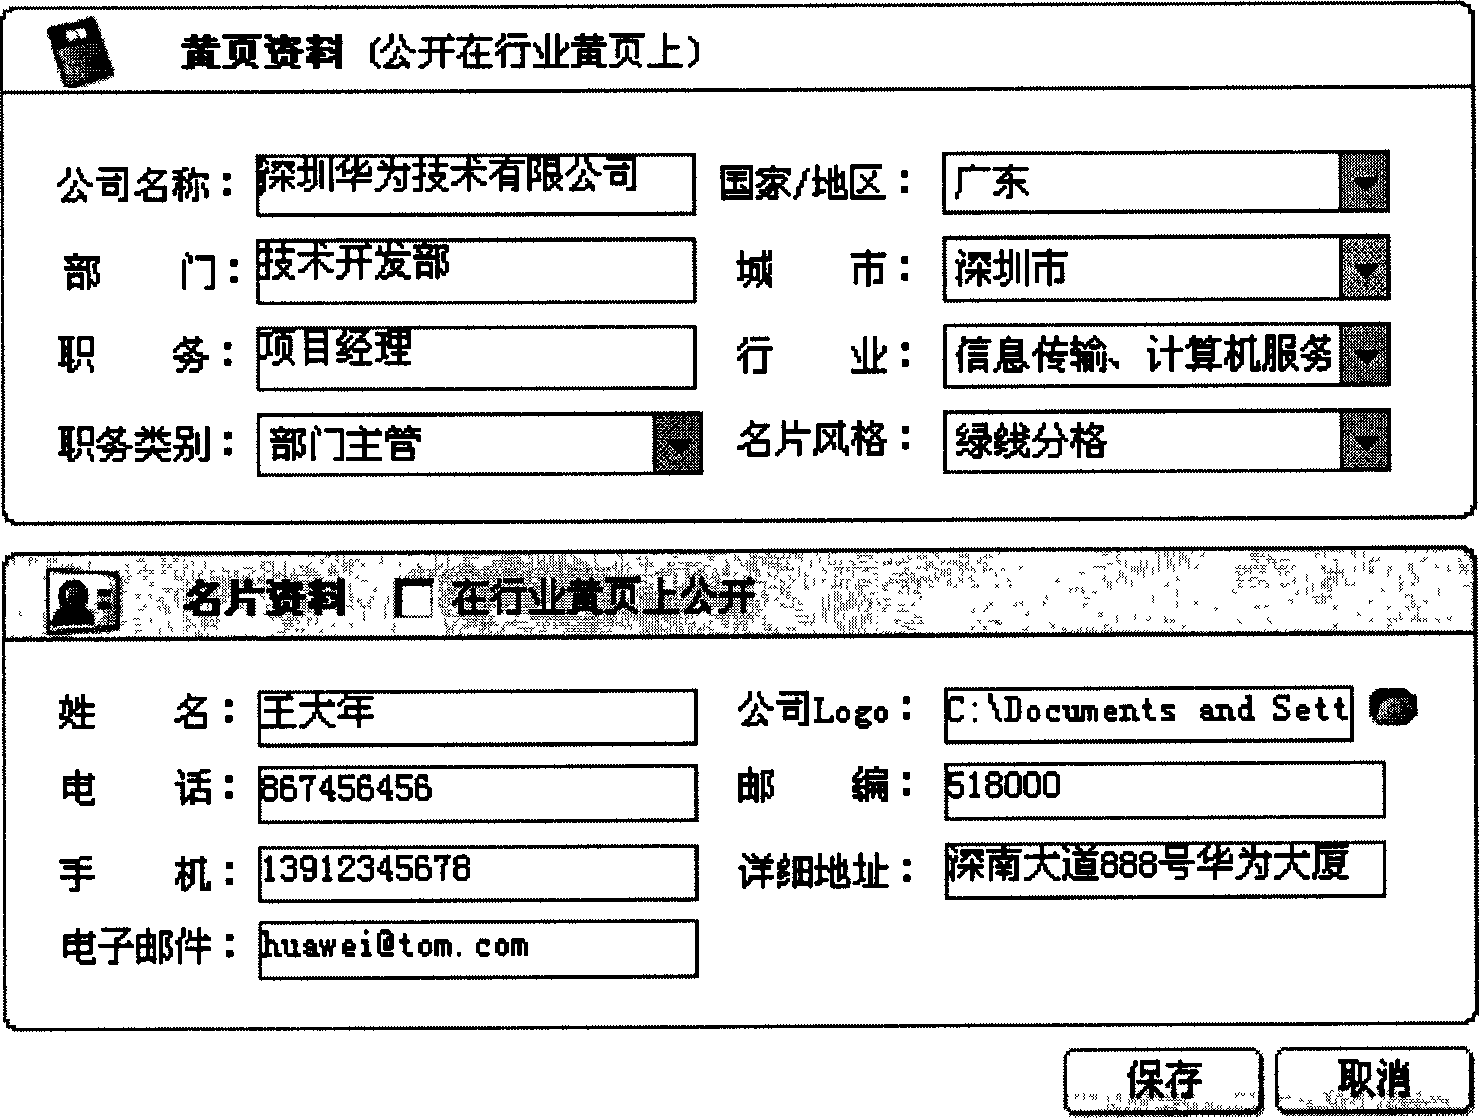 Network visiting-card processing method and system